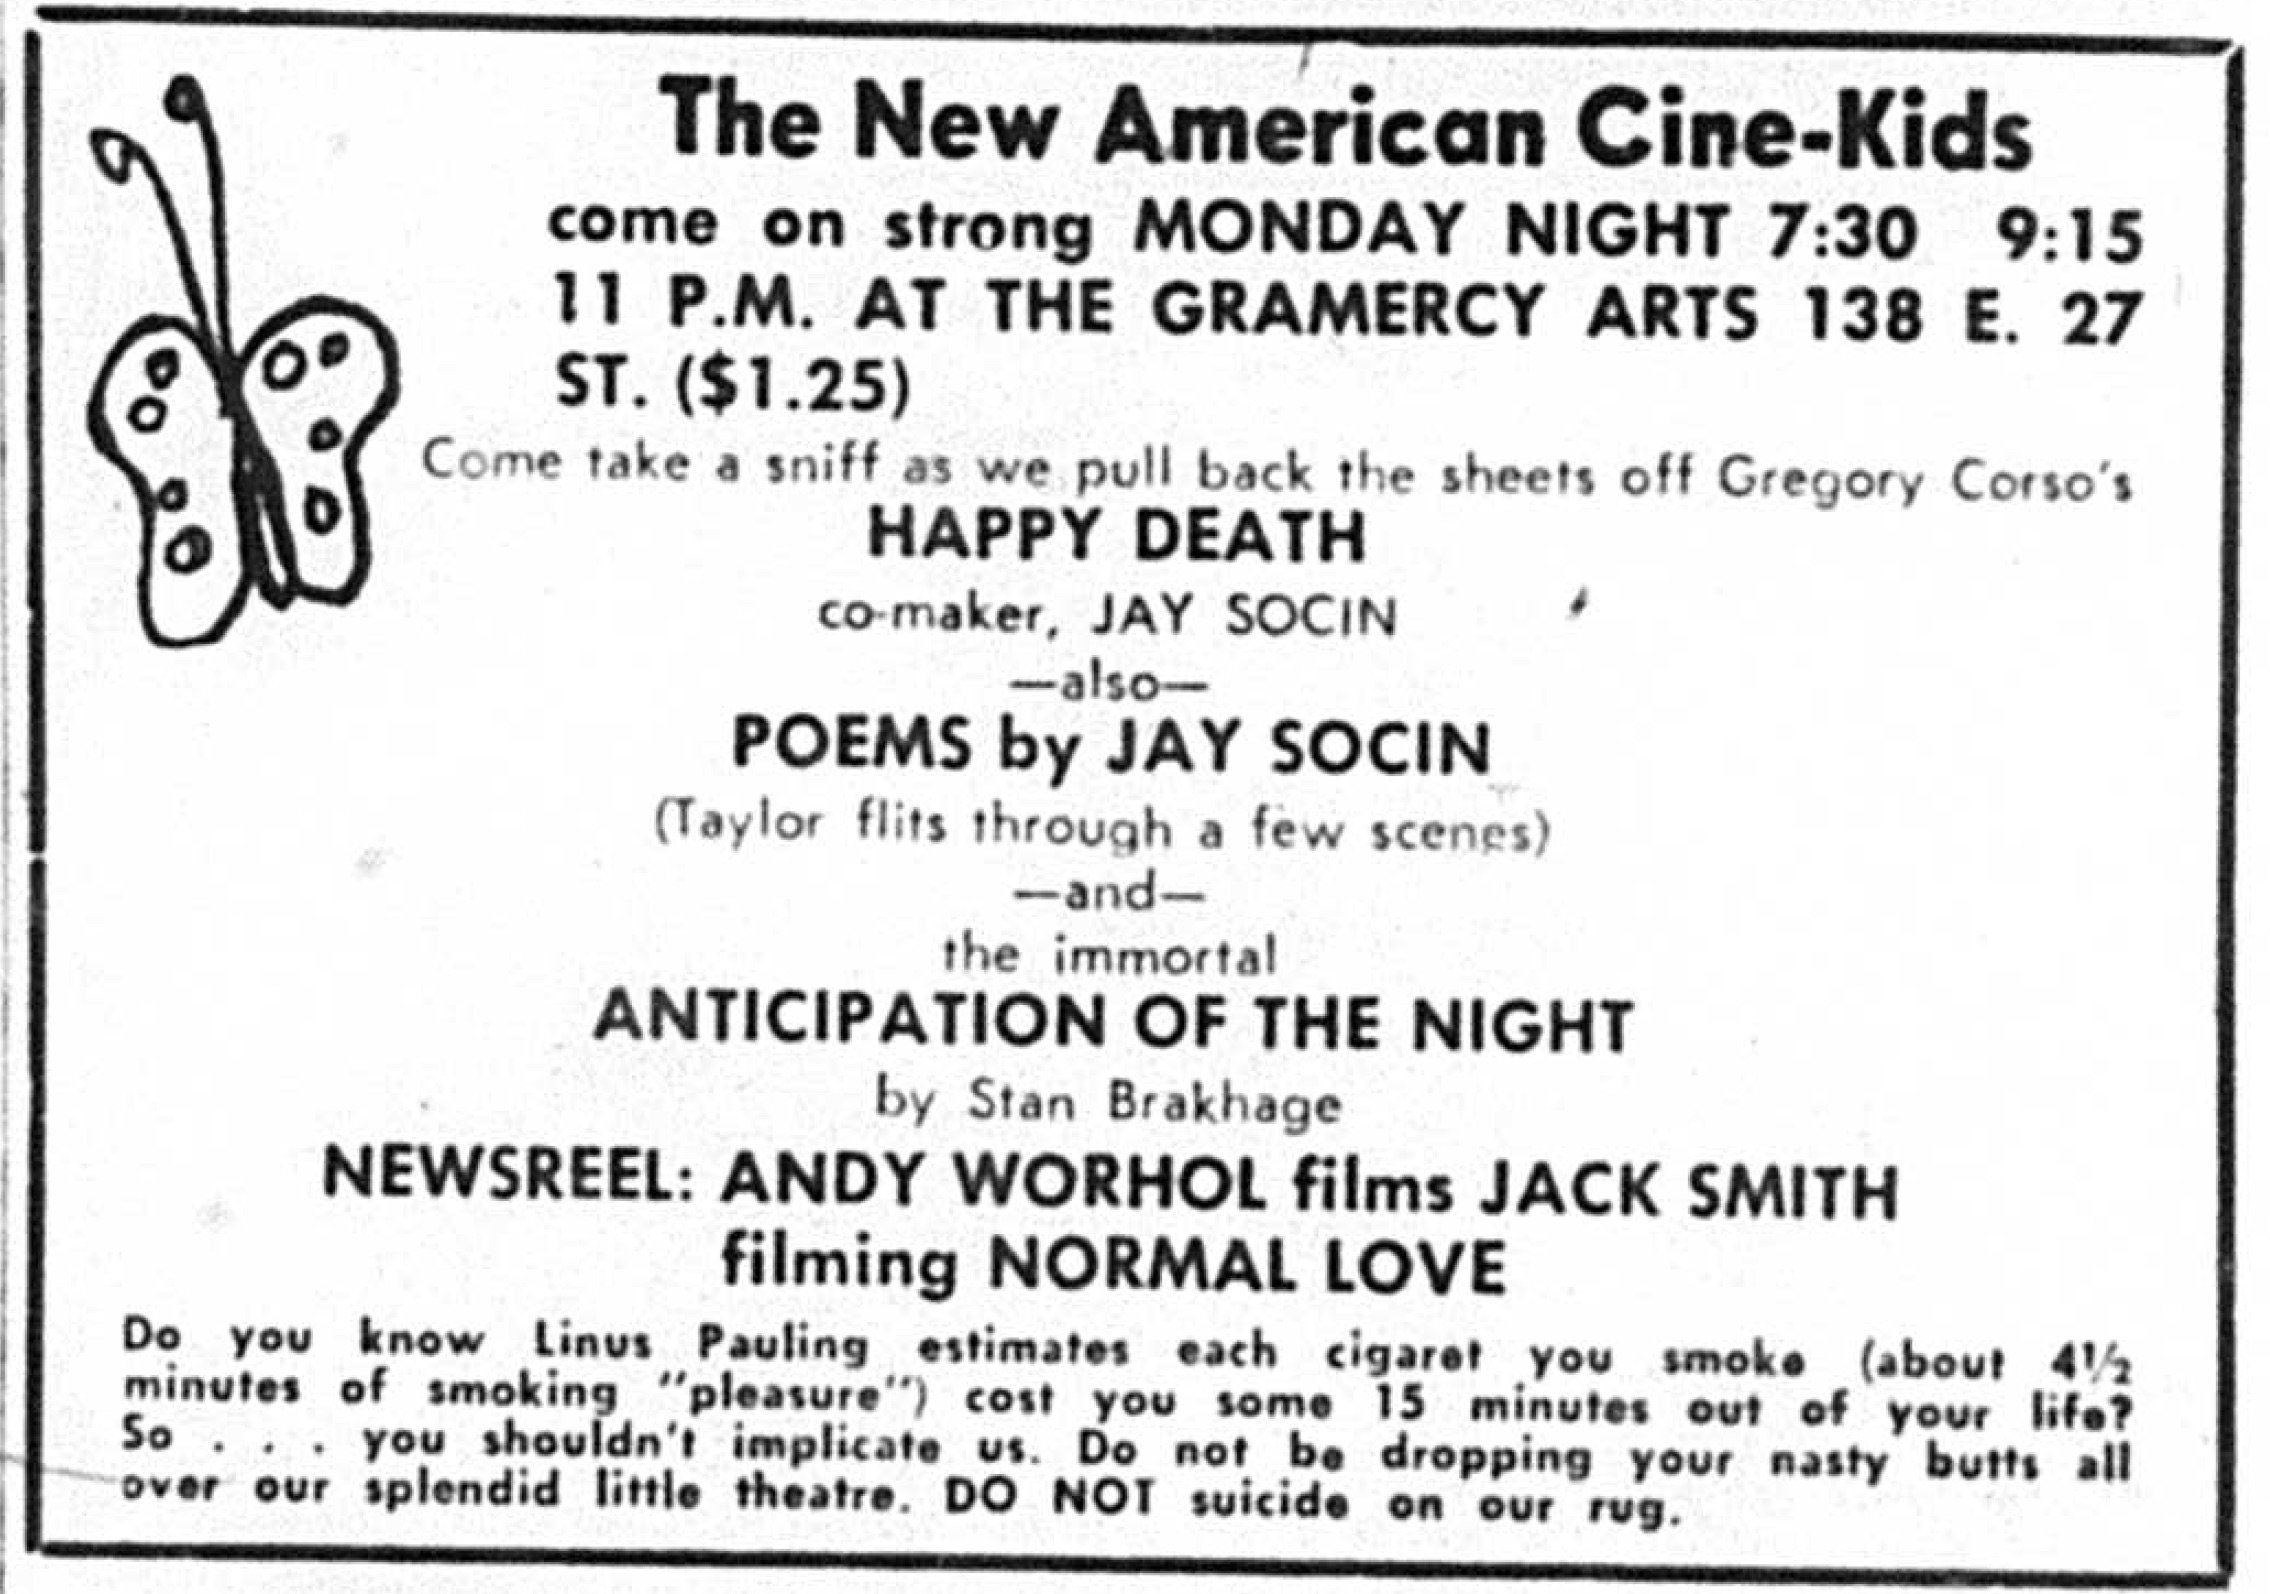 Inside a black outlined rectangle is an advert, densely filled with words. It writes “The New American Cine-kids” and lists programmes of the night. A hand-drawn butterfly doodle is on the left top corner. 